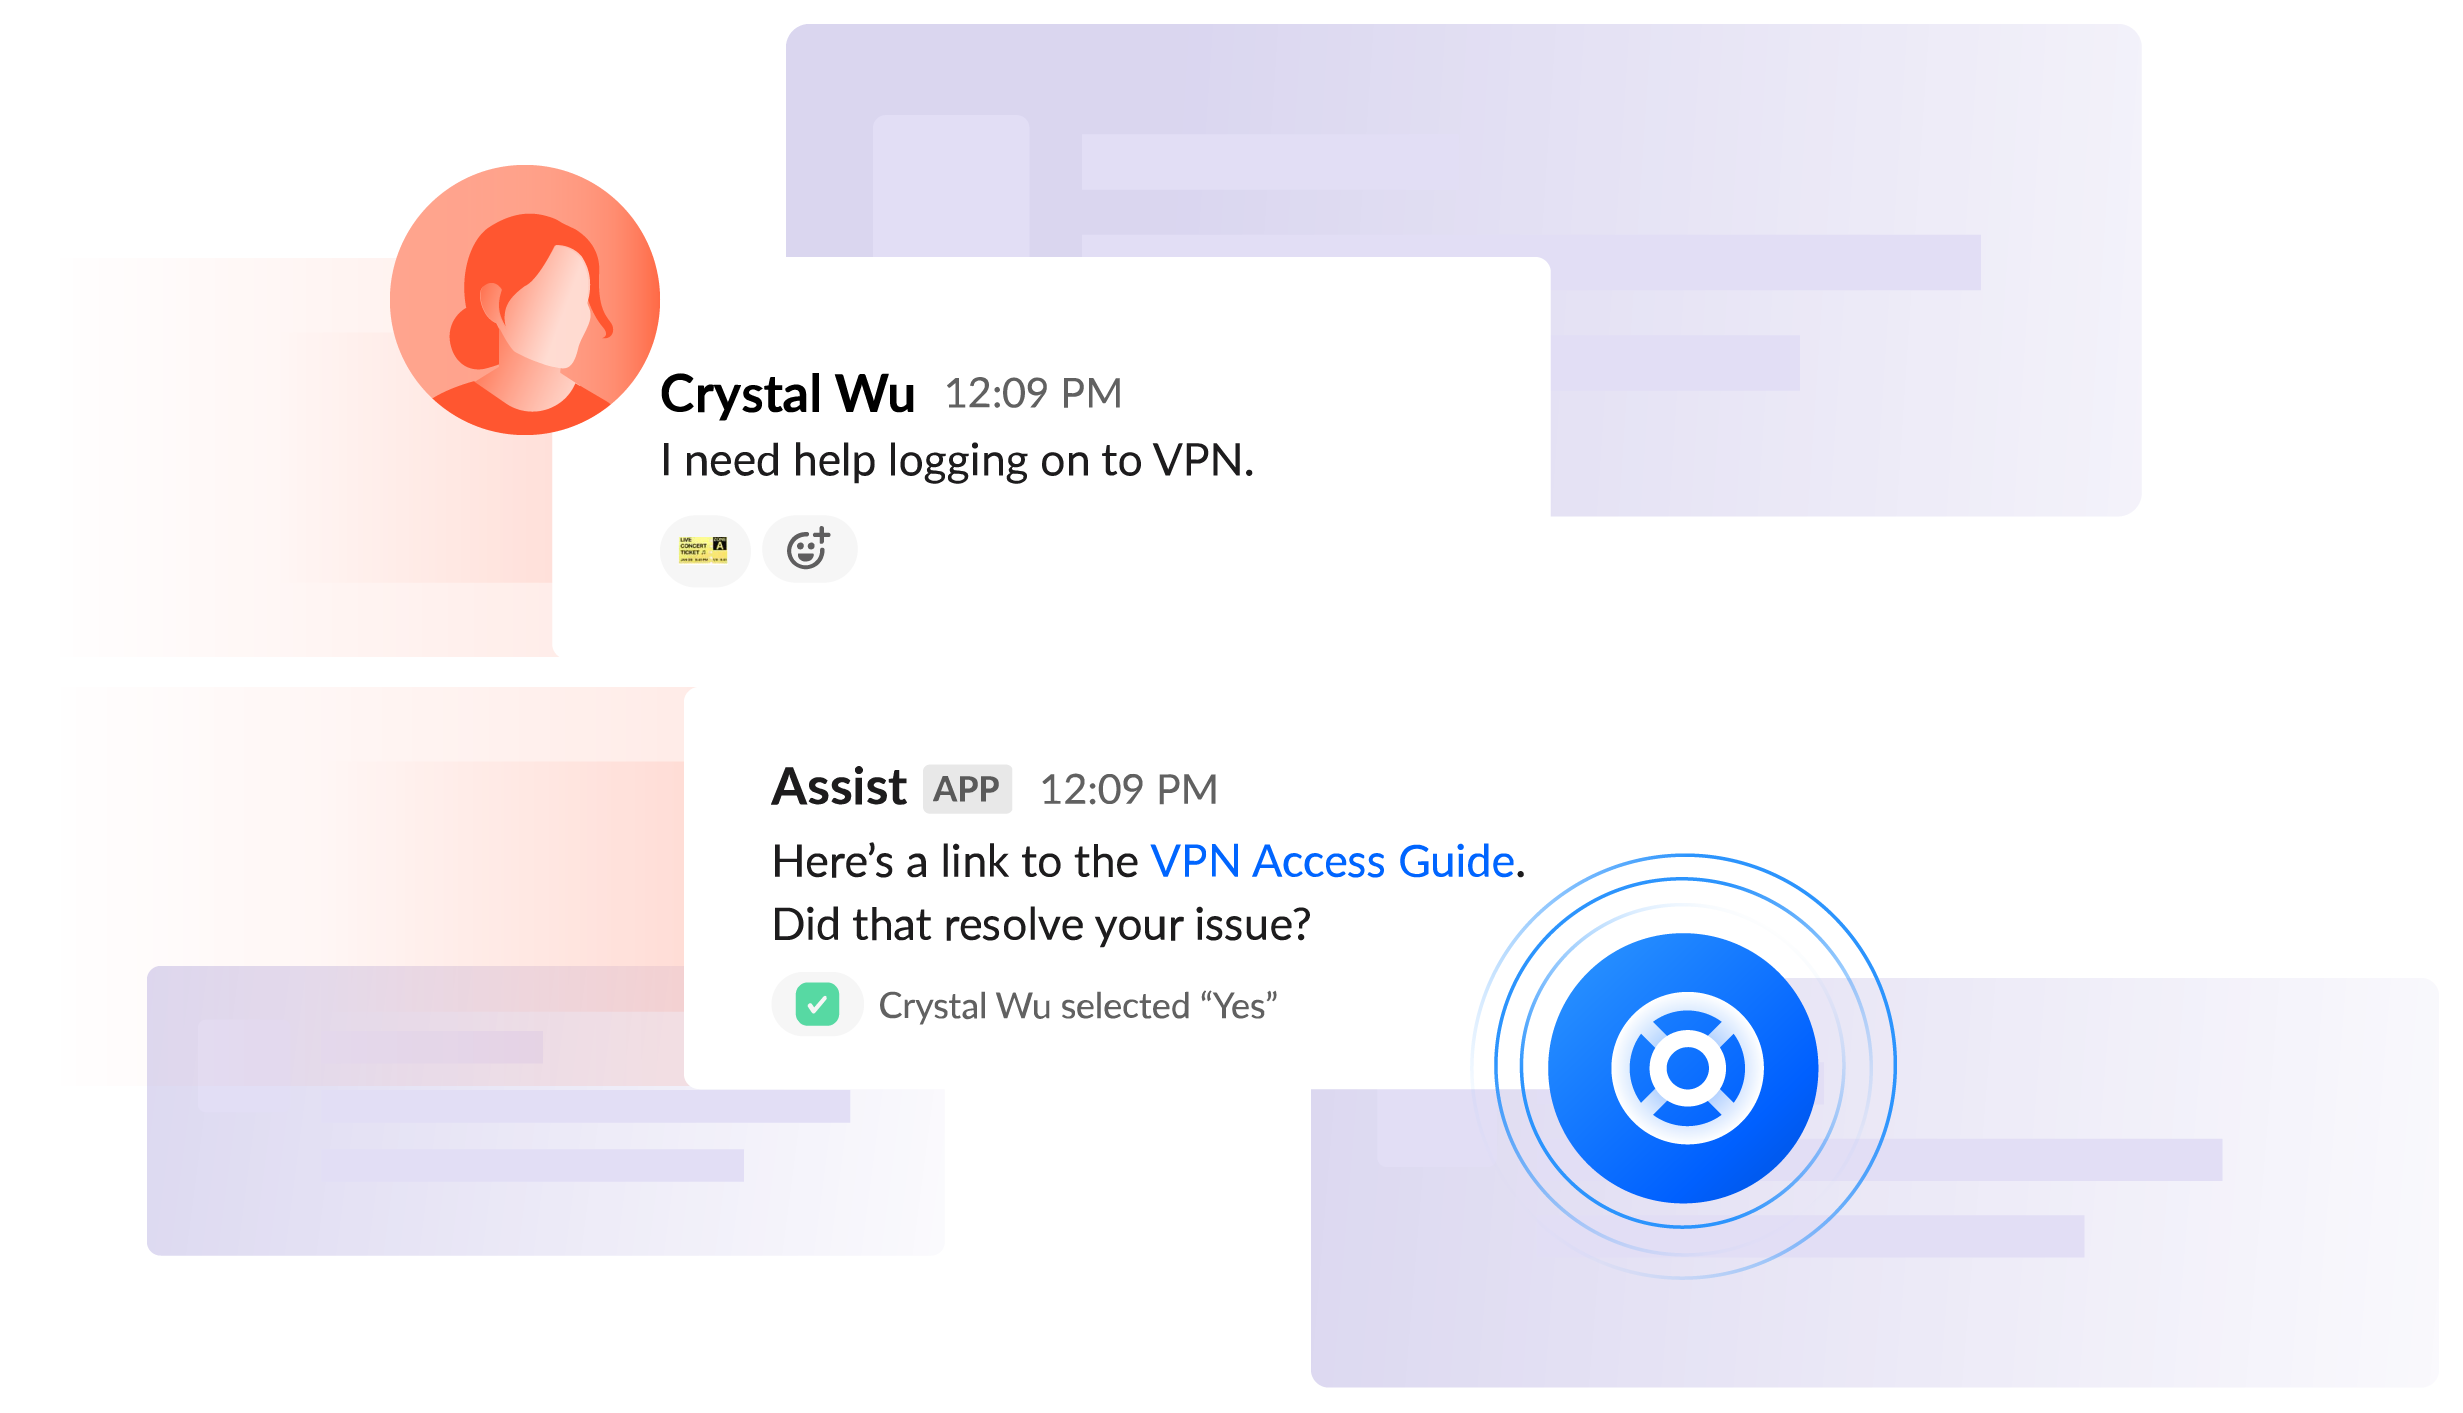 Slack Chat "I need help logging in to VPN"- Crystal; "Here's a link to the VPN access guide. Did that resolve your issue?" - Assist